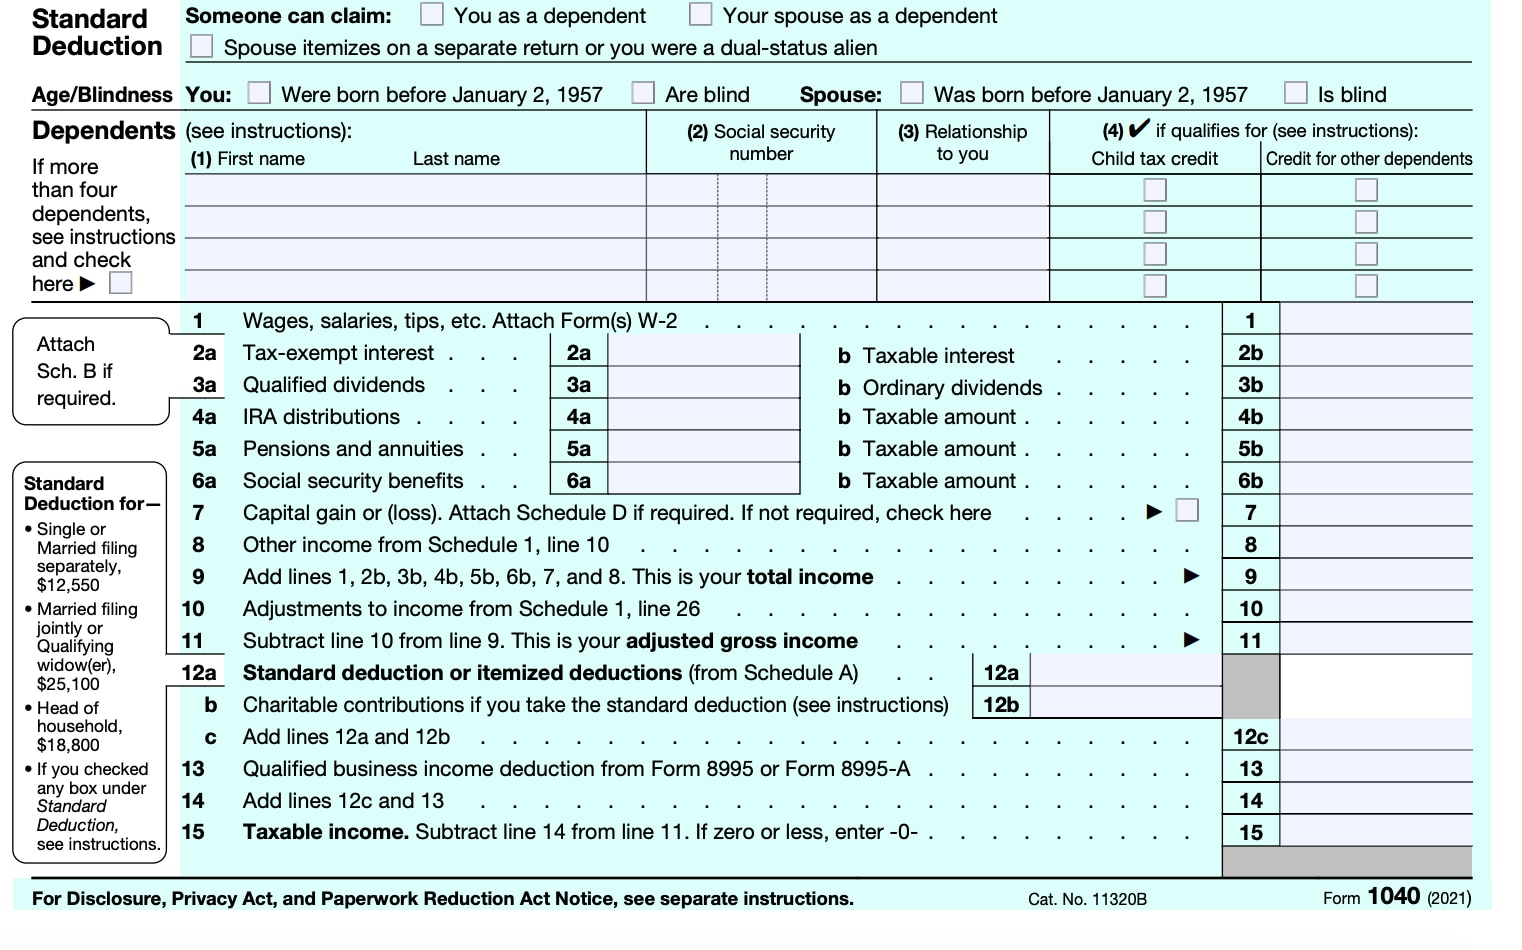 How to understand Form 1040